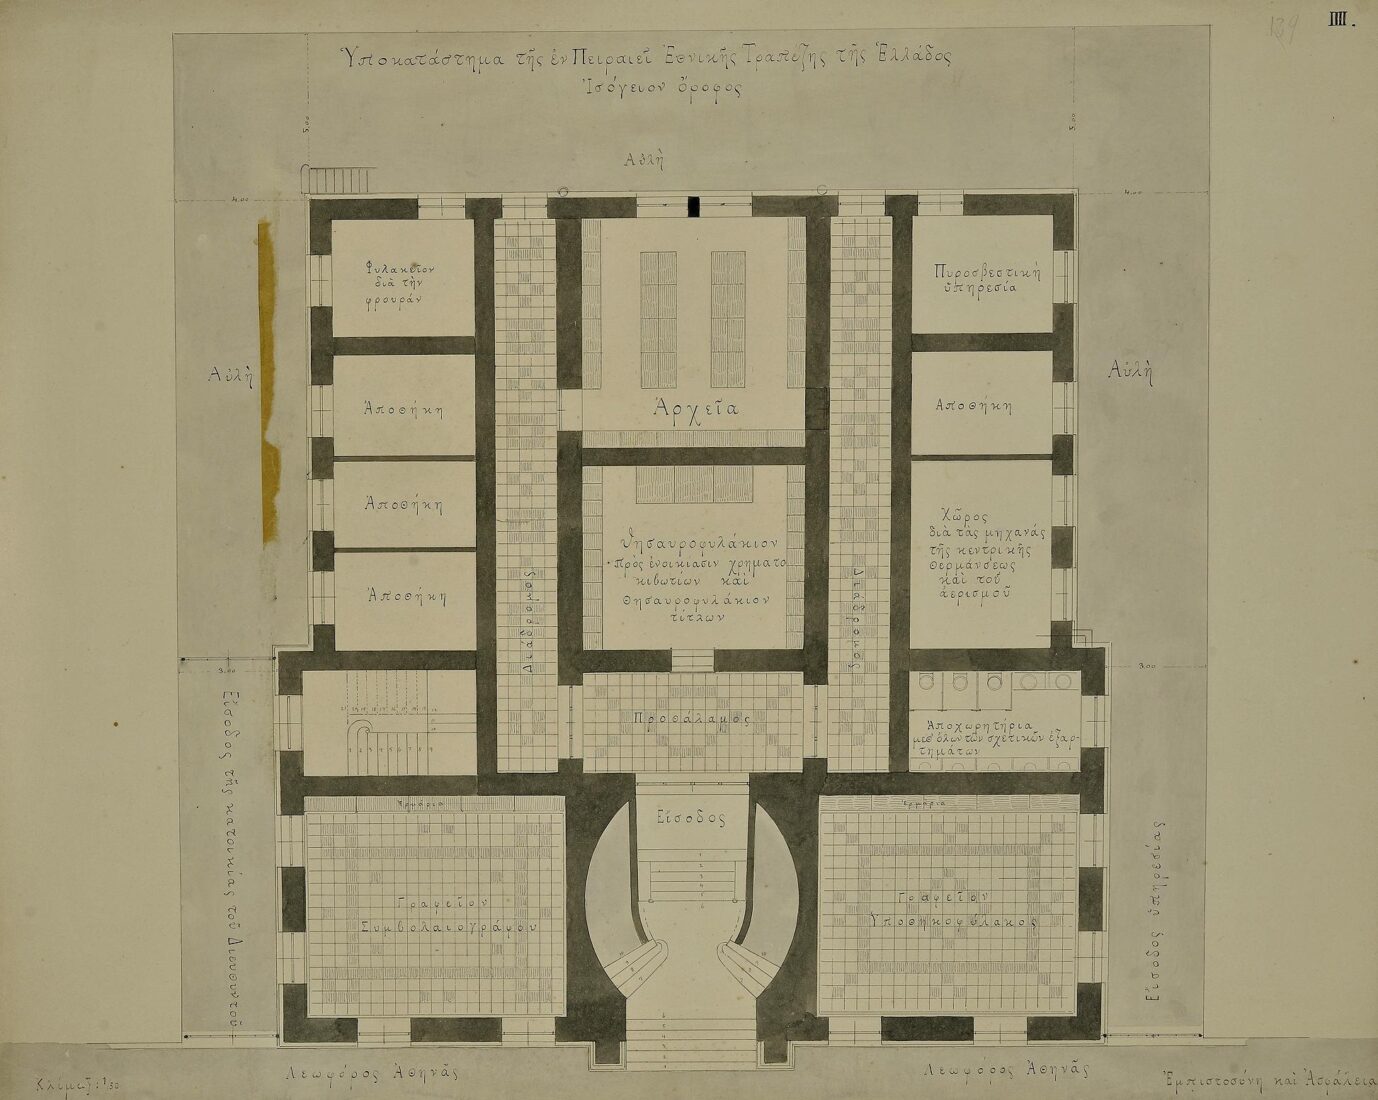 Branch of the National Bank of Greece, Piraeus, Iroon Polytehniou Street [former Athinas Street], Ground Floor Plan (Not Implemented) - Ziller Ernst